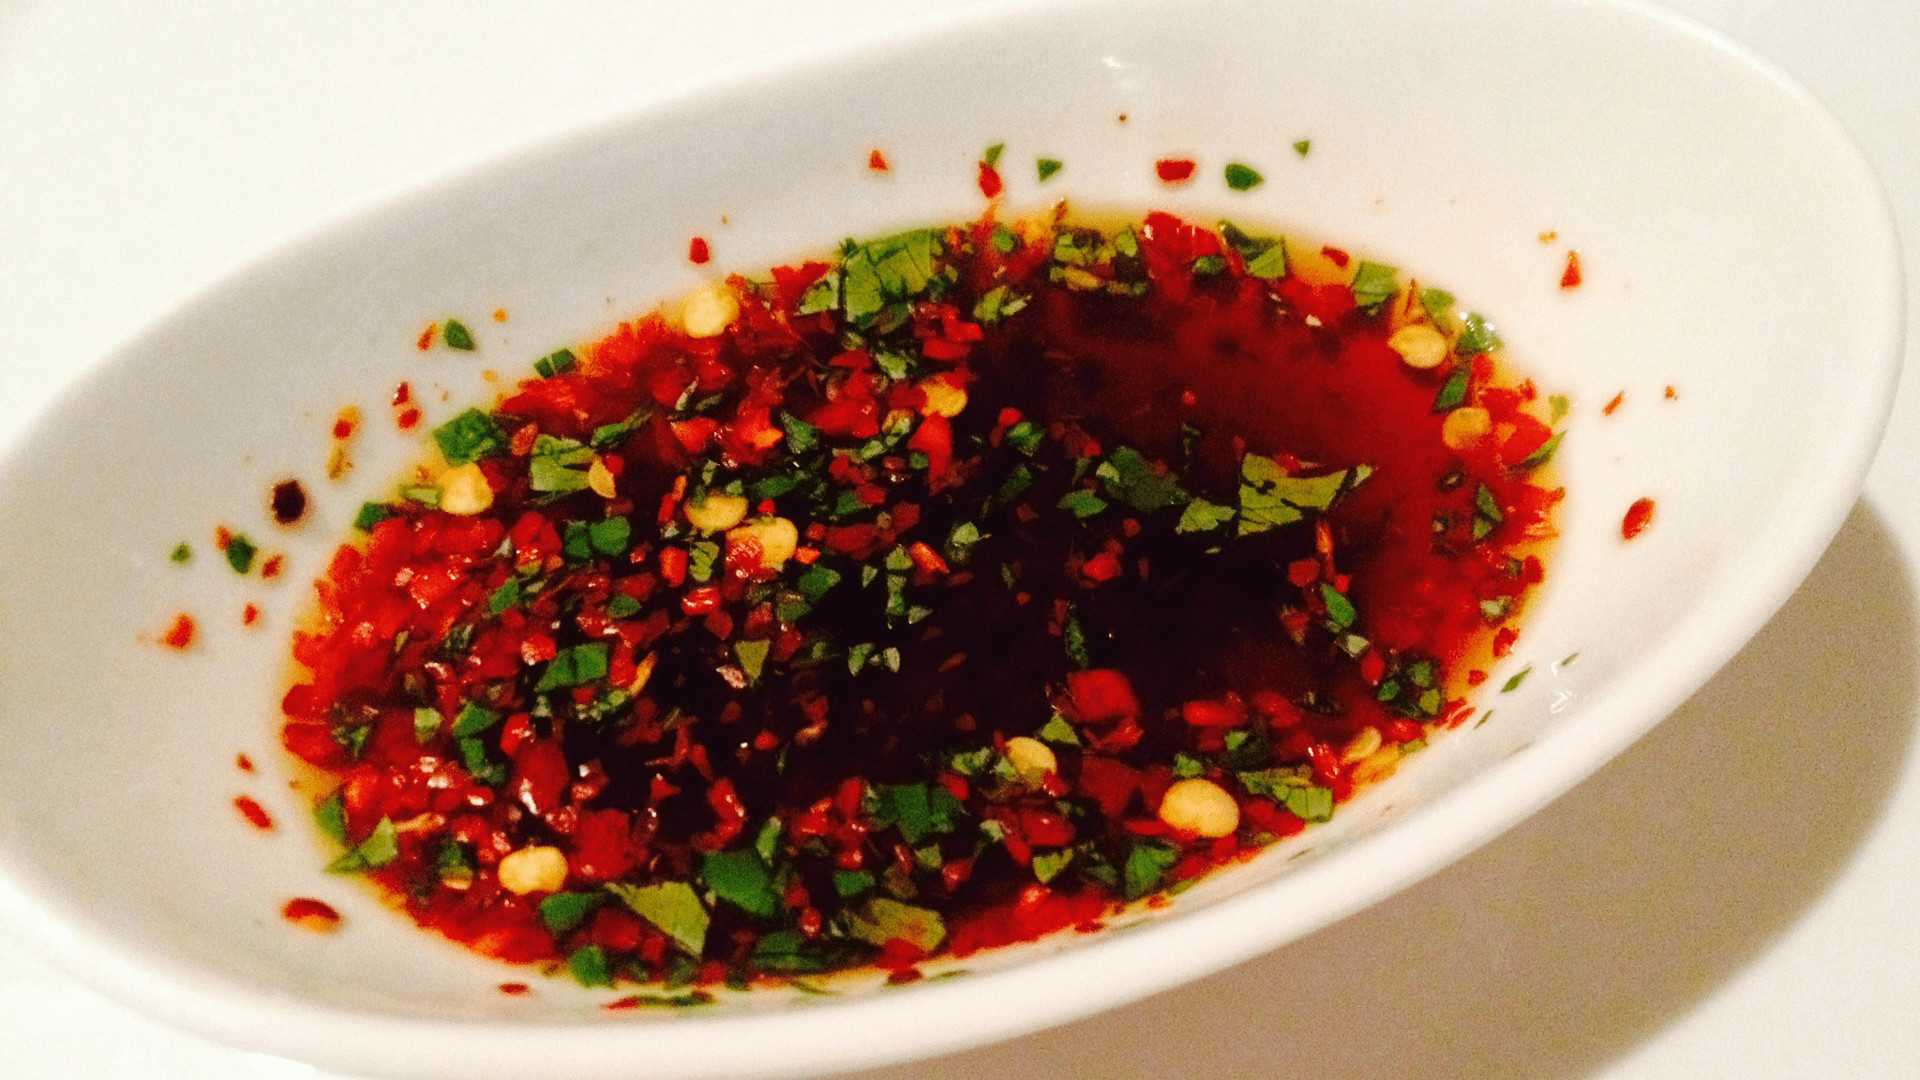 Asian Sauce Recipes
 Spicy Asian Dipping Sauce Free PD Recipe Protective Diet